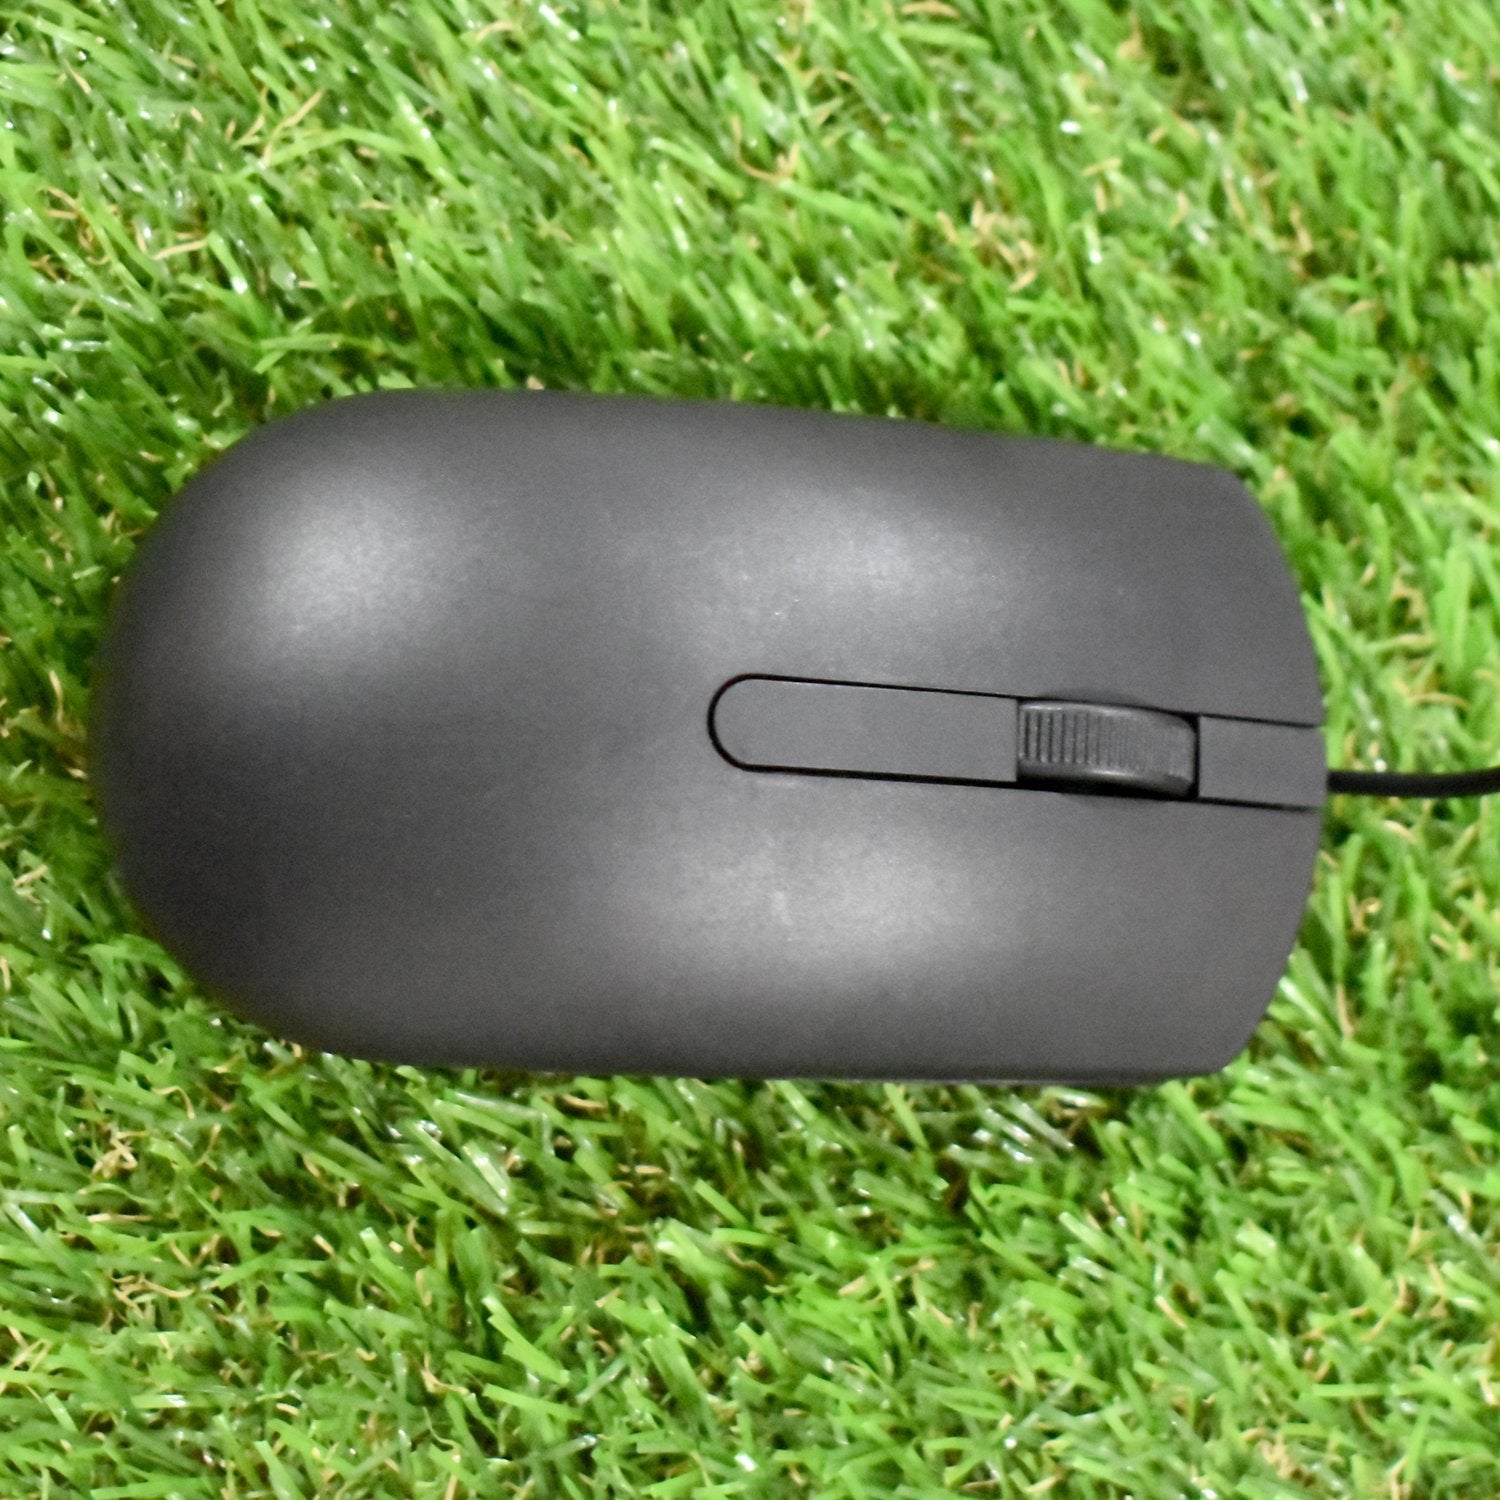 6022 Computer Wired Optical Mouse 